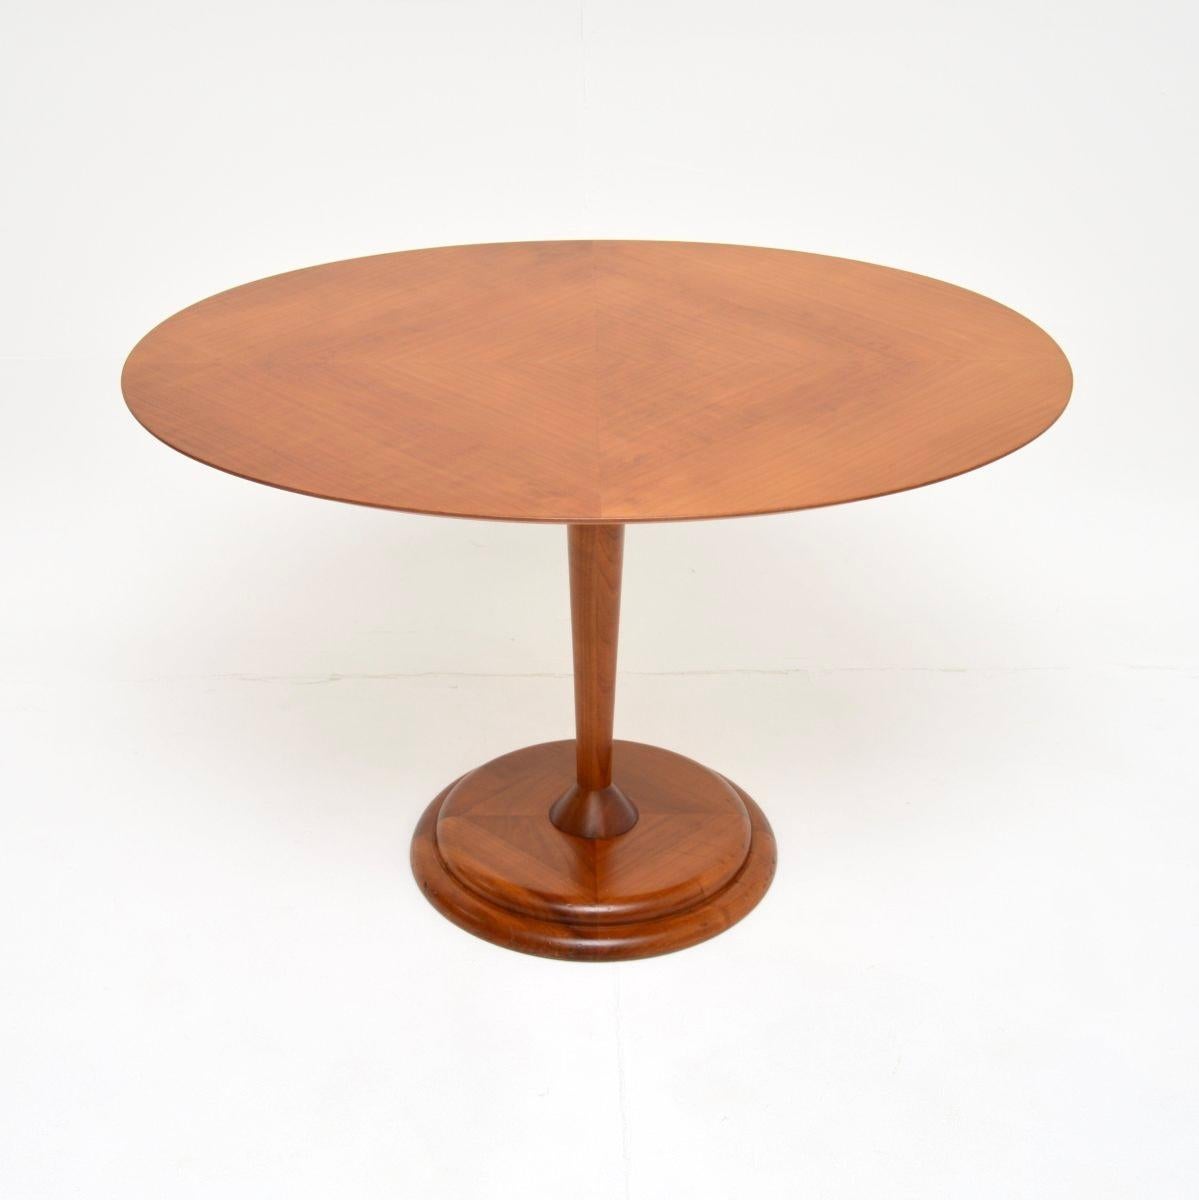 A stylish and extremely well made vintage Swedish walnut coffee table, dating from the 1960’s.

This is of superb quality and has a gorgeous design. The oval top has chamfered edges and sits on a central column, terminating in a beautifully made